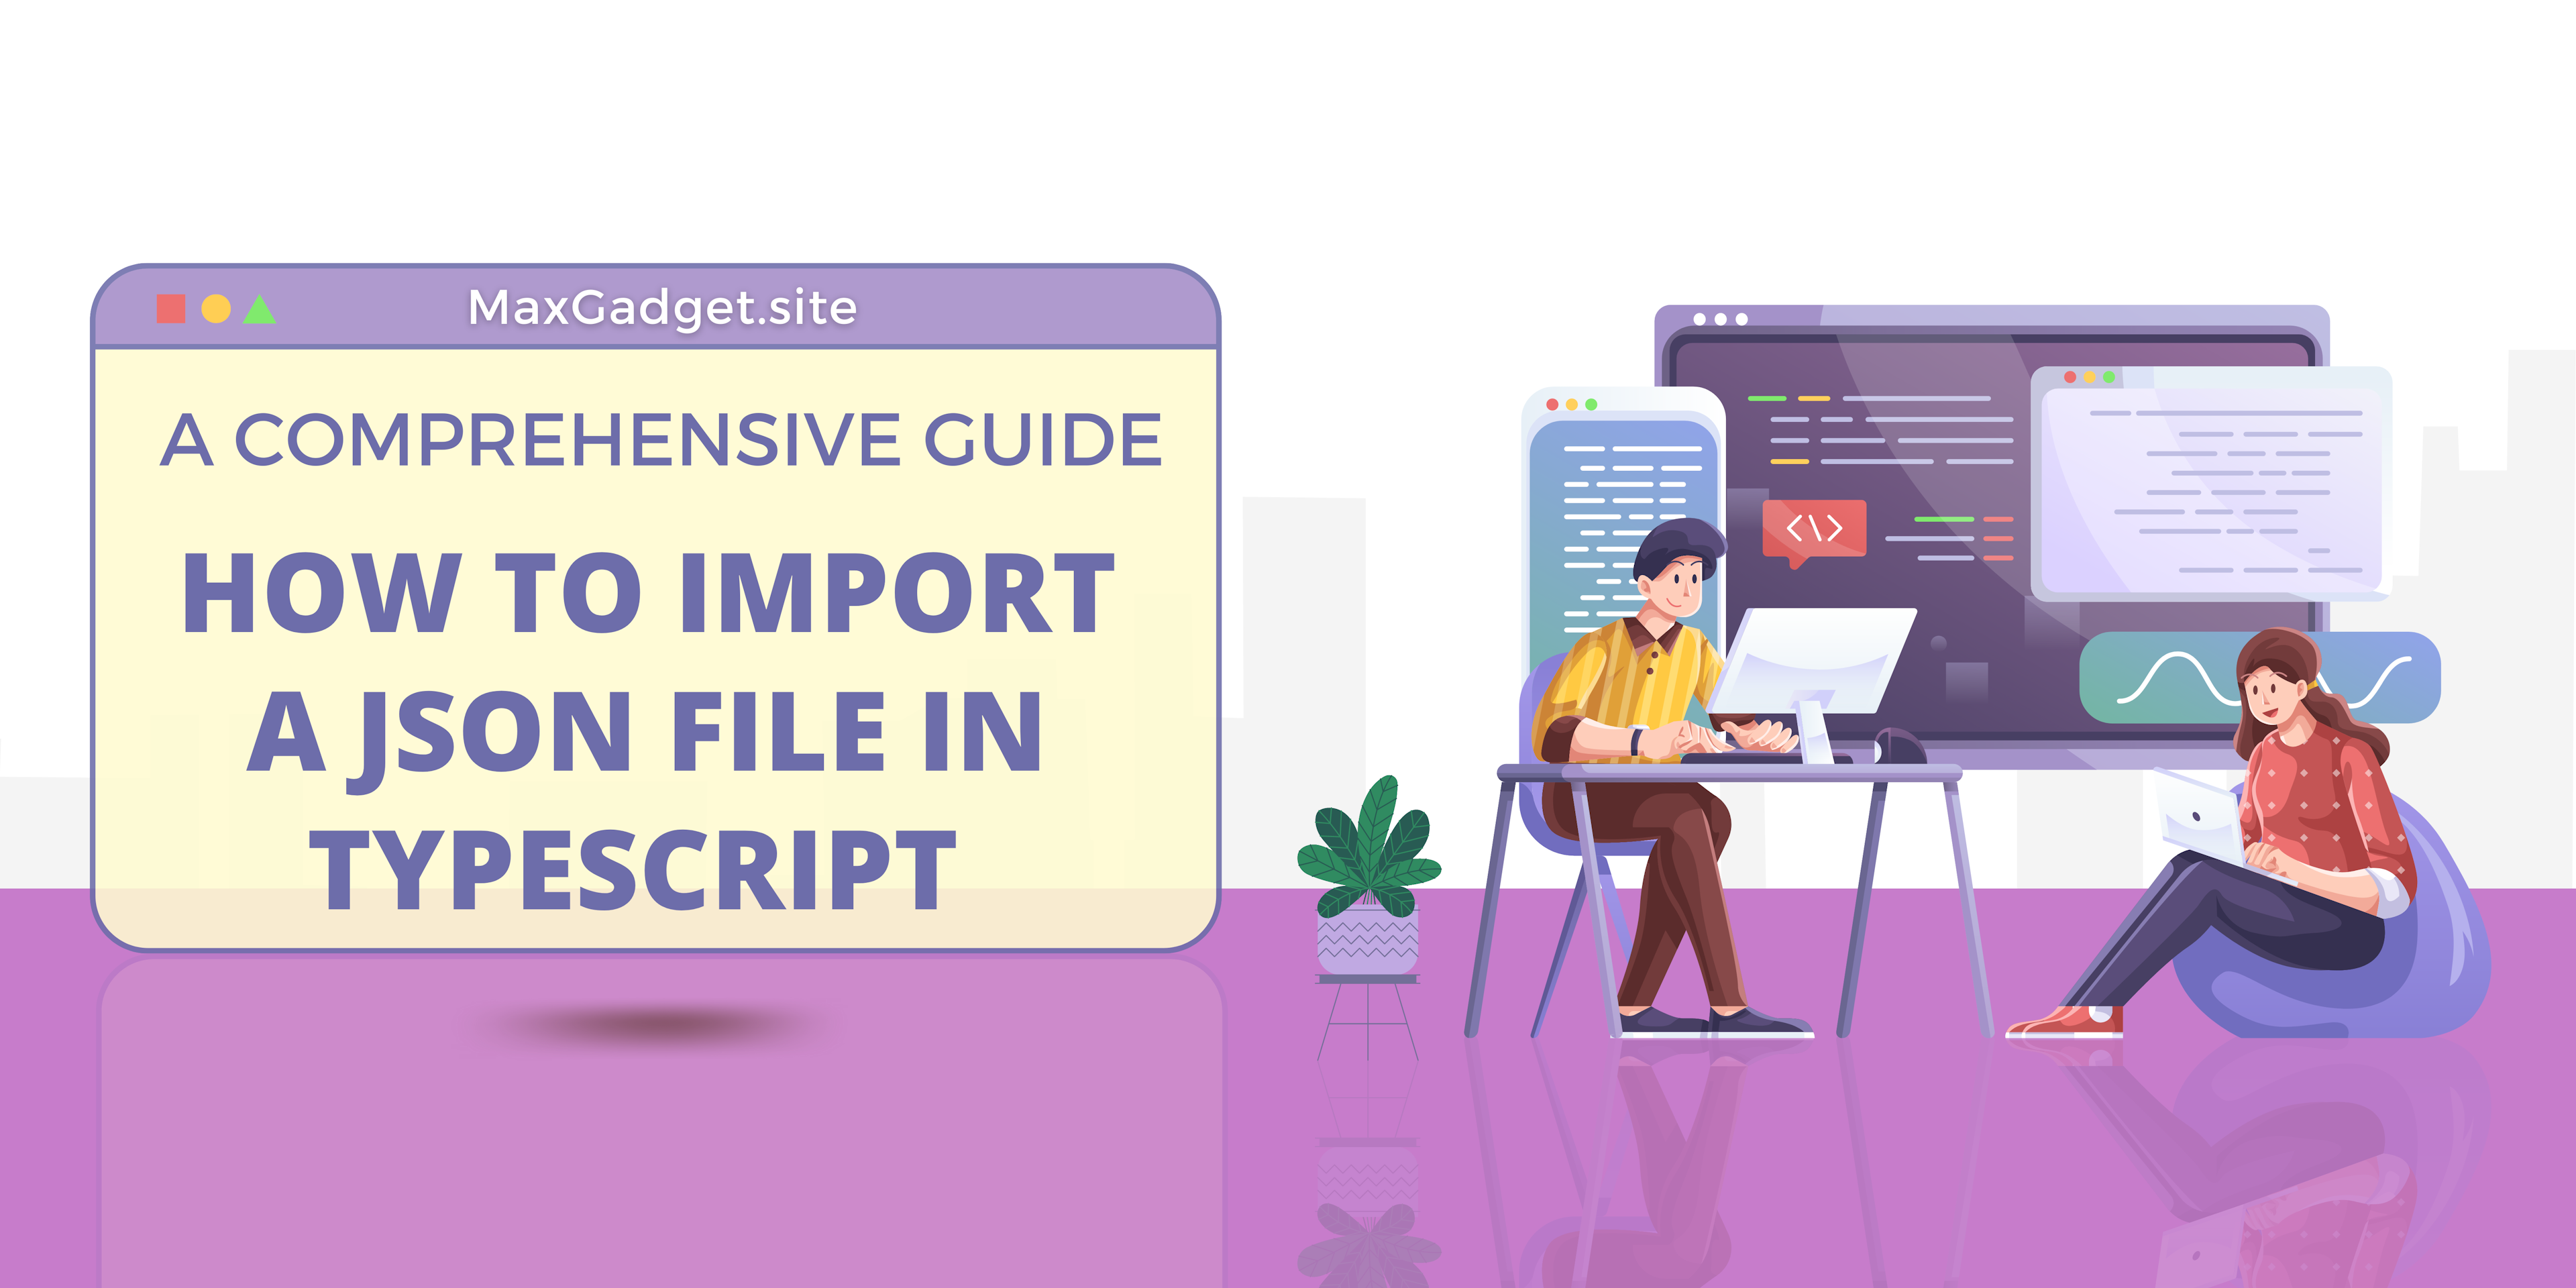 How to Import a JSON file in Typescript: A Comprehensive Guide